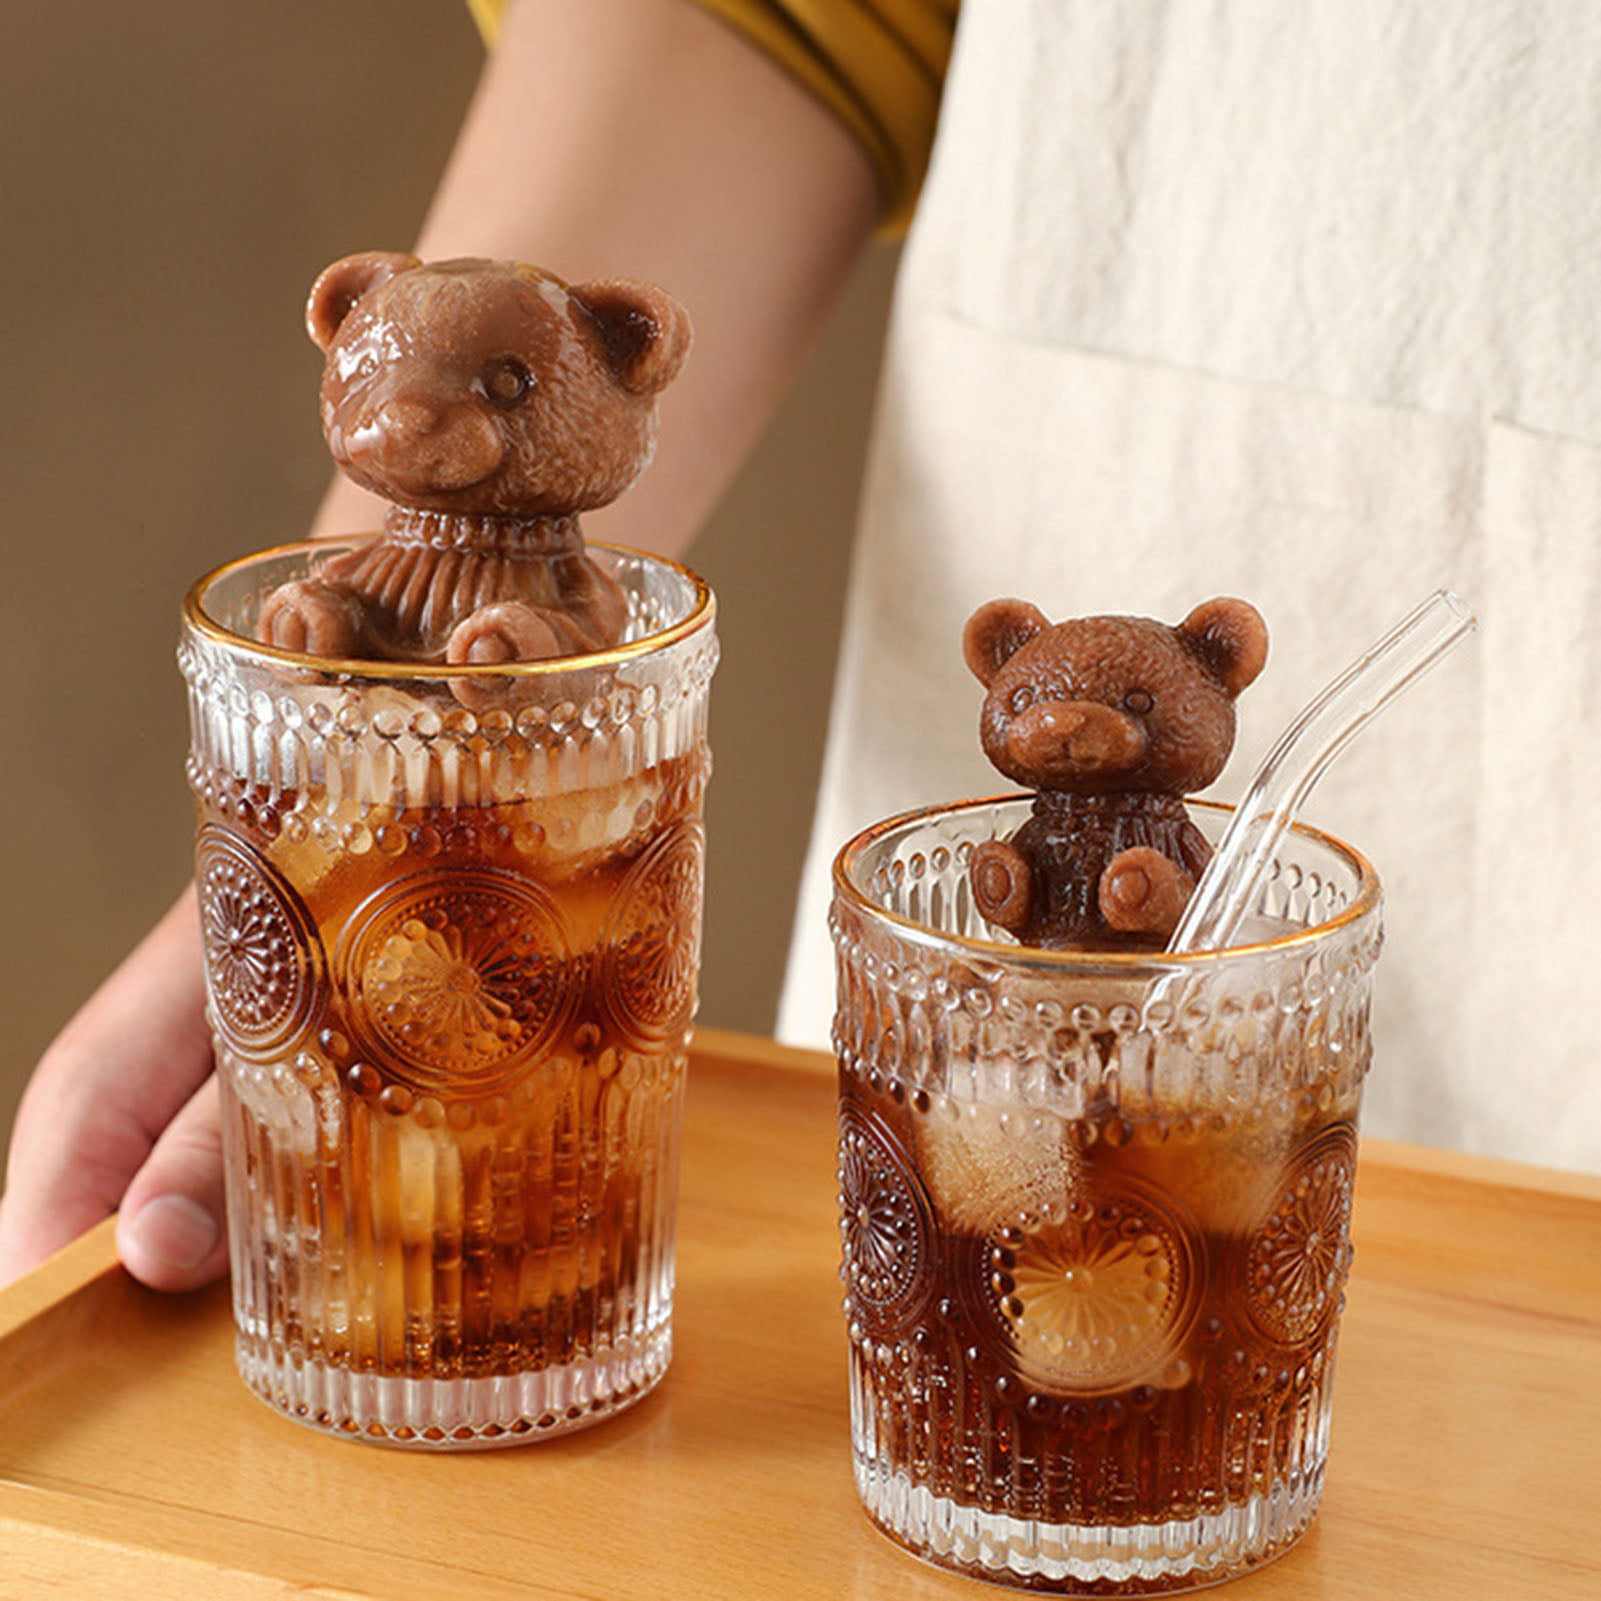 PUROSUR Bear Ice Mold 4 Pack, Ice Cube Trays Molds 3D DIY Drink Cake Decoration for Christmas, Party, Family to Make Lovely Ice Coffee, Juice, Cocktail. Candy